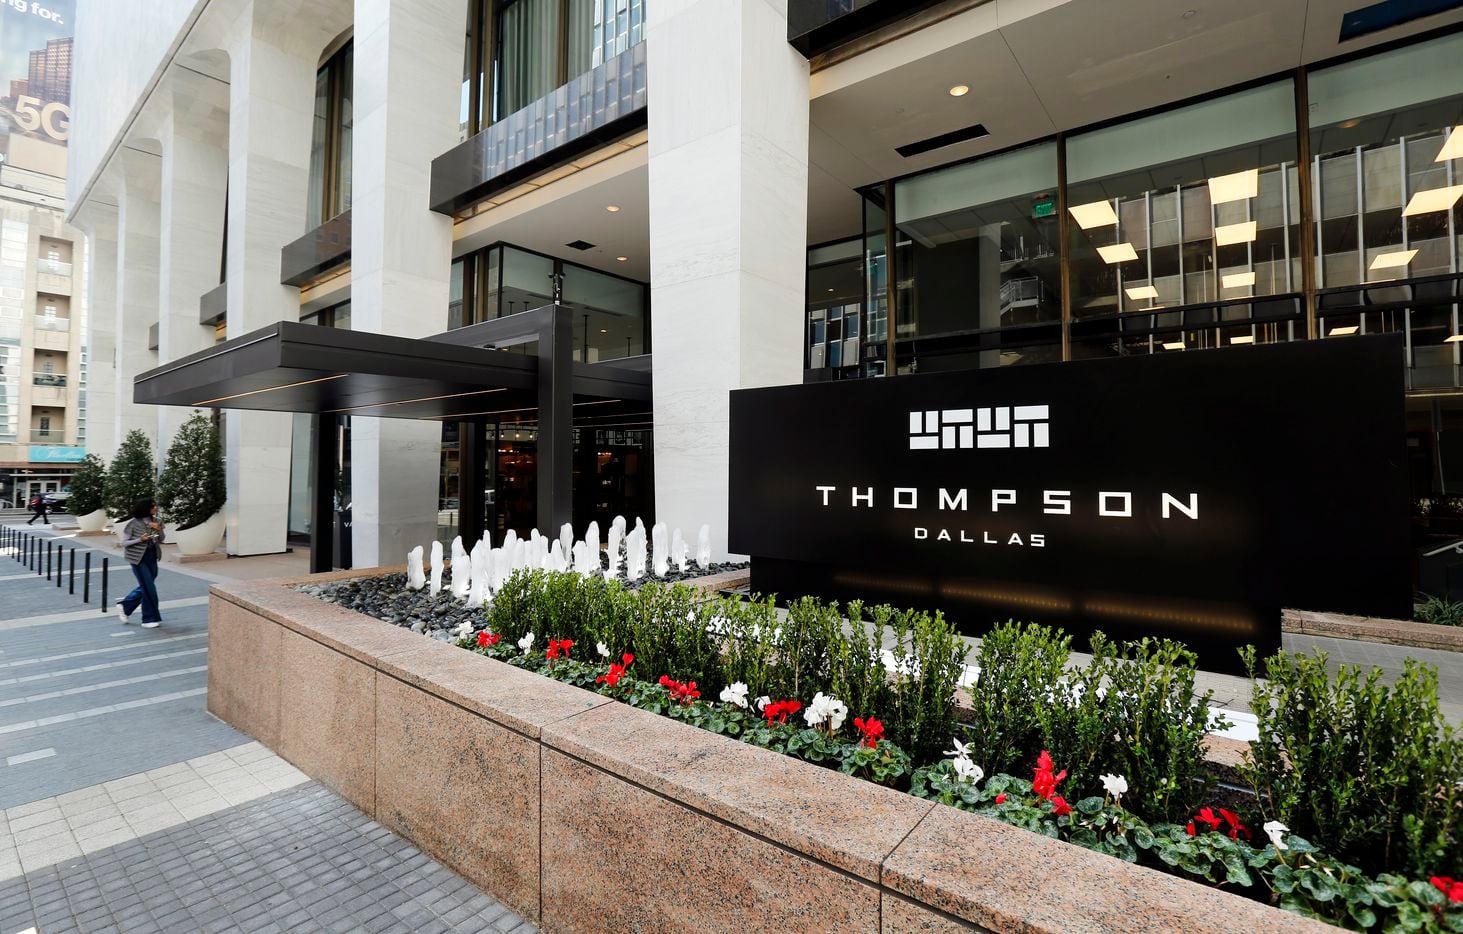 An exterior view of the entry to the 219-room Thompson Dallas luxury hotel that is part of a $460 million redevelopment of  the old First National Bank Tower in downtown Dallas.